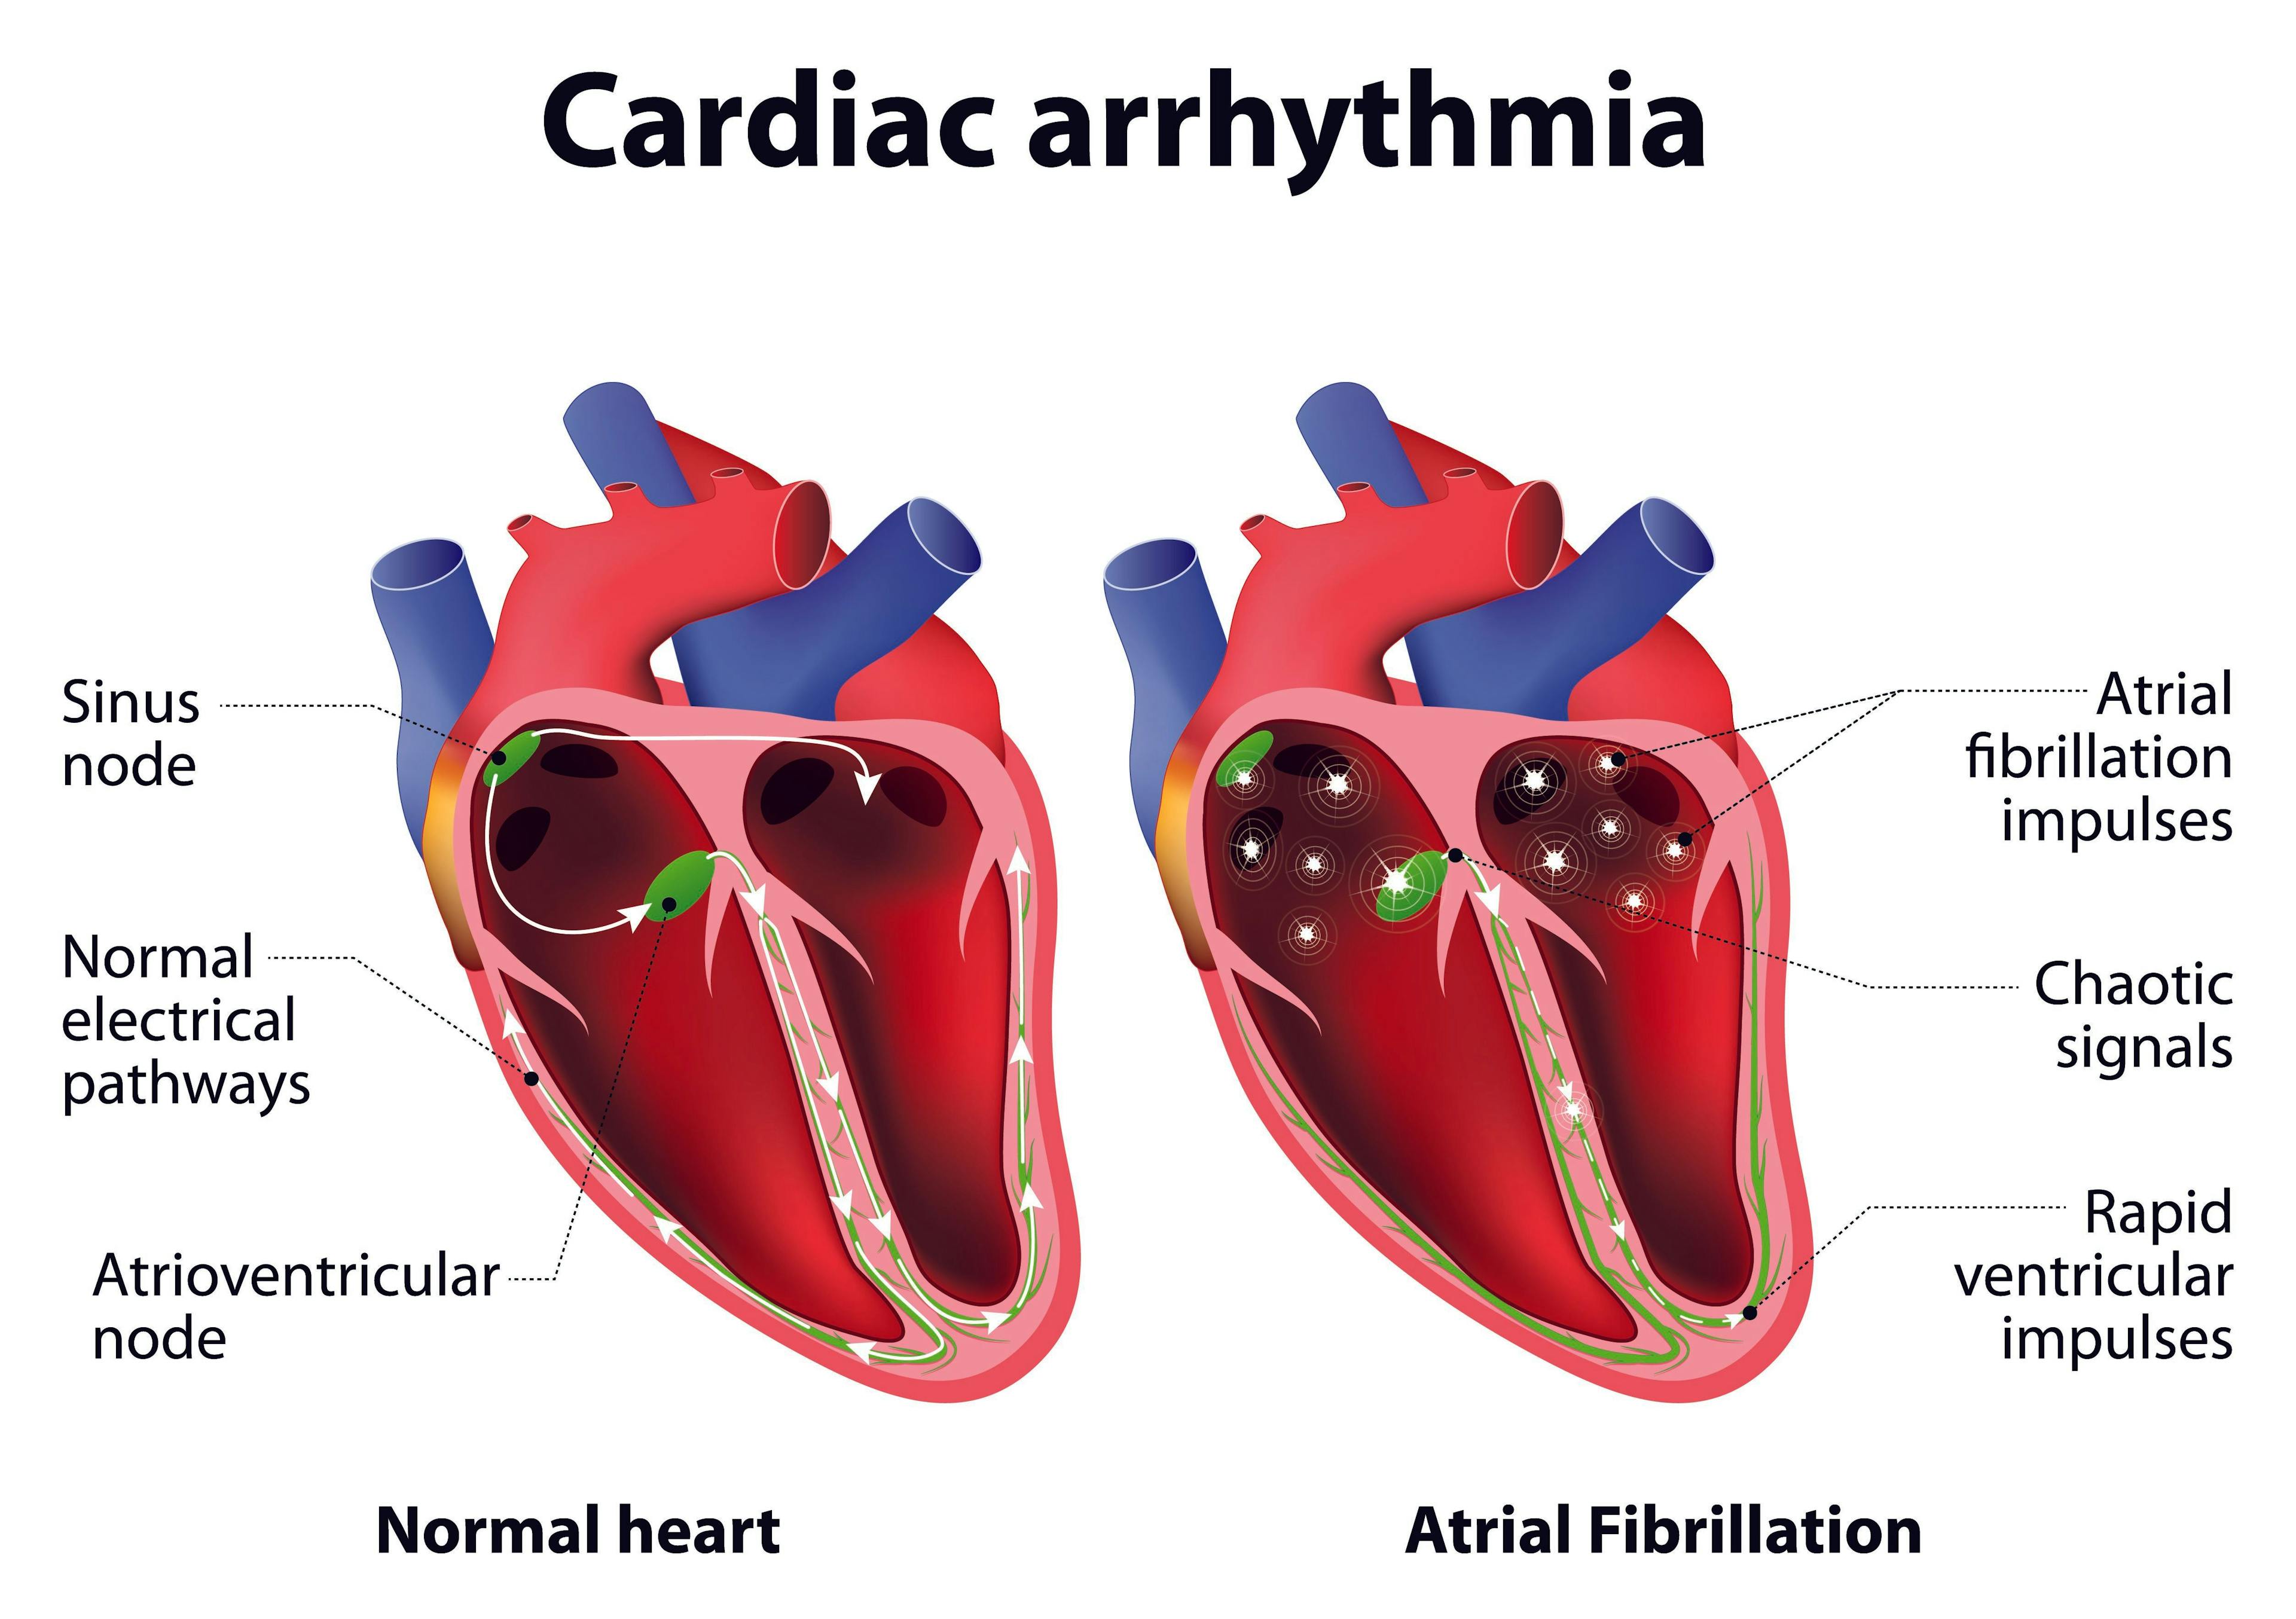 Atrial Fibrillation: Considerations for the Use of BTK Inhibitors